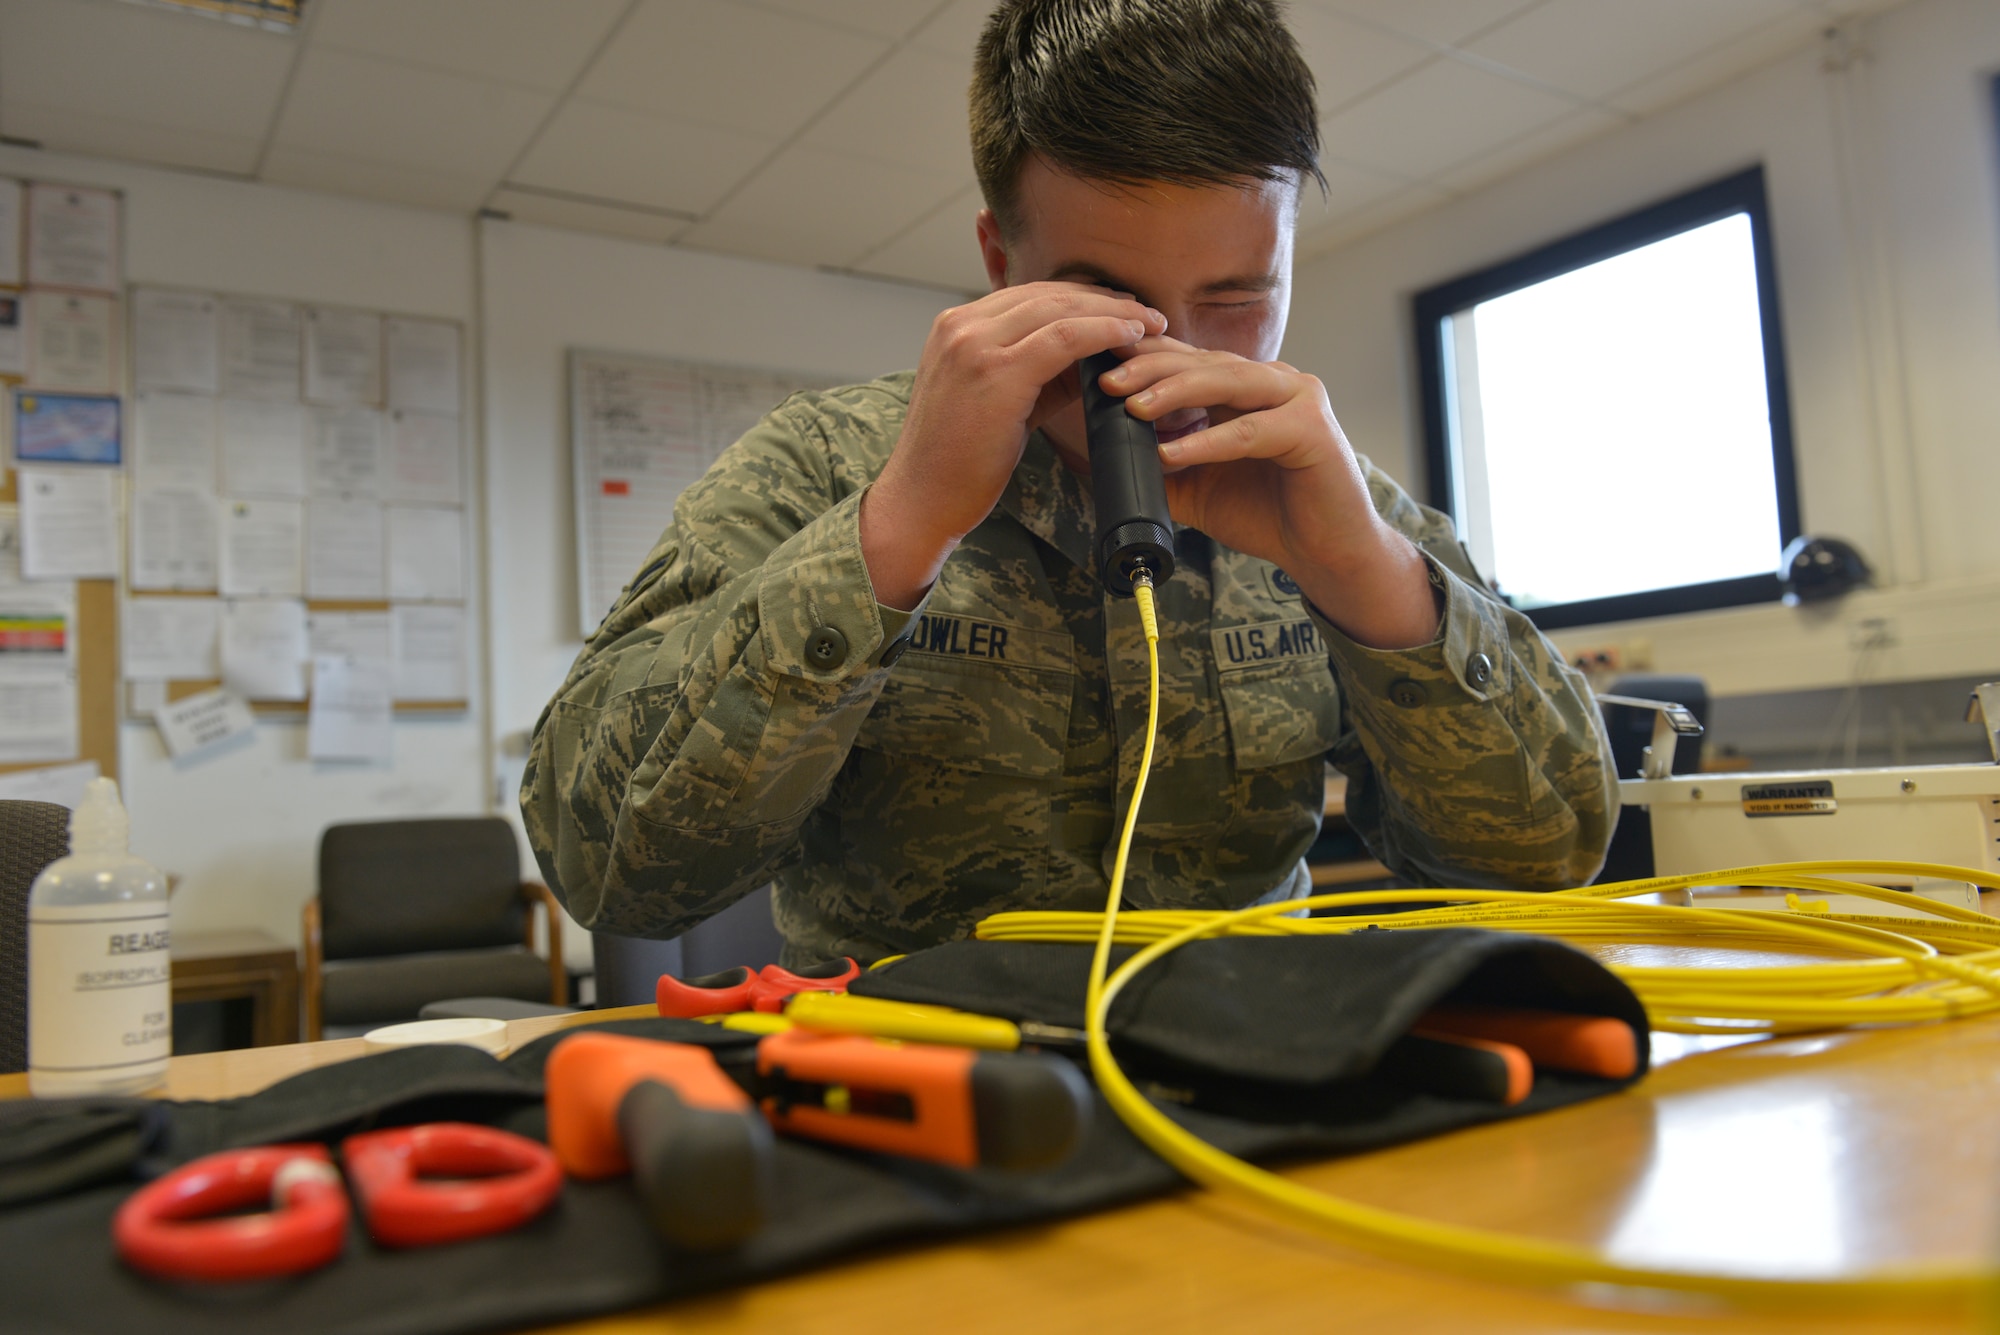 039 – Airman 1st Class Dillon Fowler, 86th Communications Squadron cable and maintenance technician, views the strand of fiber through a microscope April 30, 2015, at Ramstein Air Base, Germany.  Fowler was selected to attend the U.S. Air Force Academy’s preparatory school in via the Leaders Encouraging Airman Development program. After completing the preparatory school, he will enter the Academy as a cadet and potential officer. (U.S. Air Force photo by Airman 1st Class Lane T. Plummer/Released)